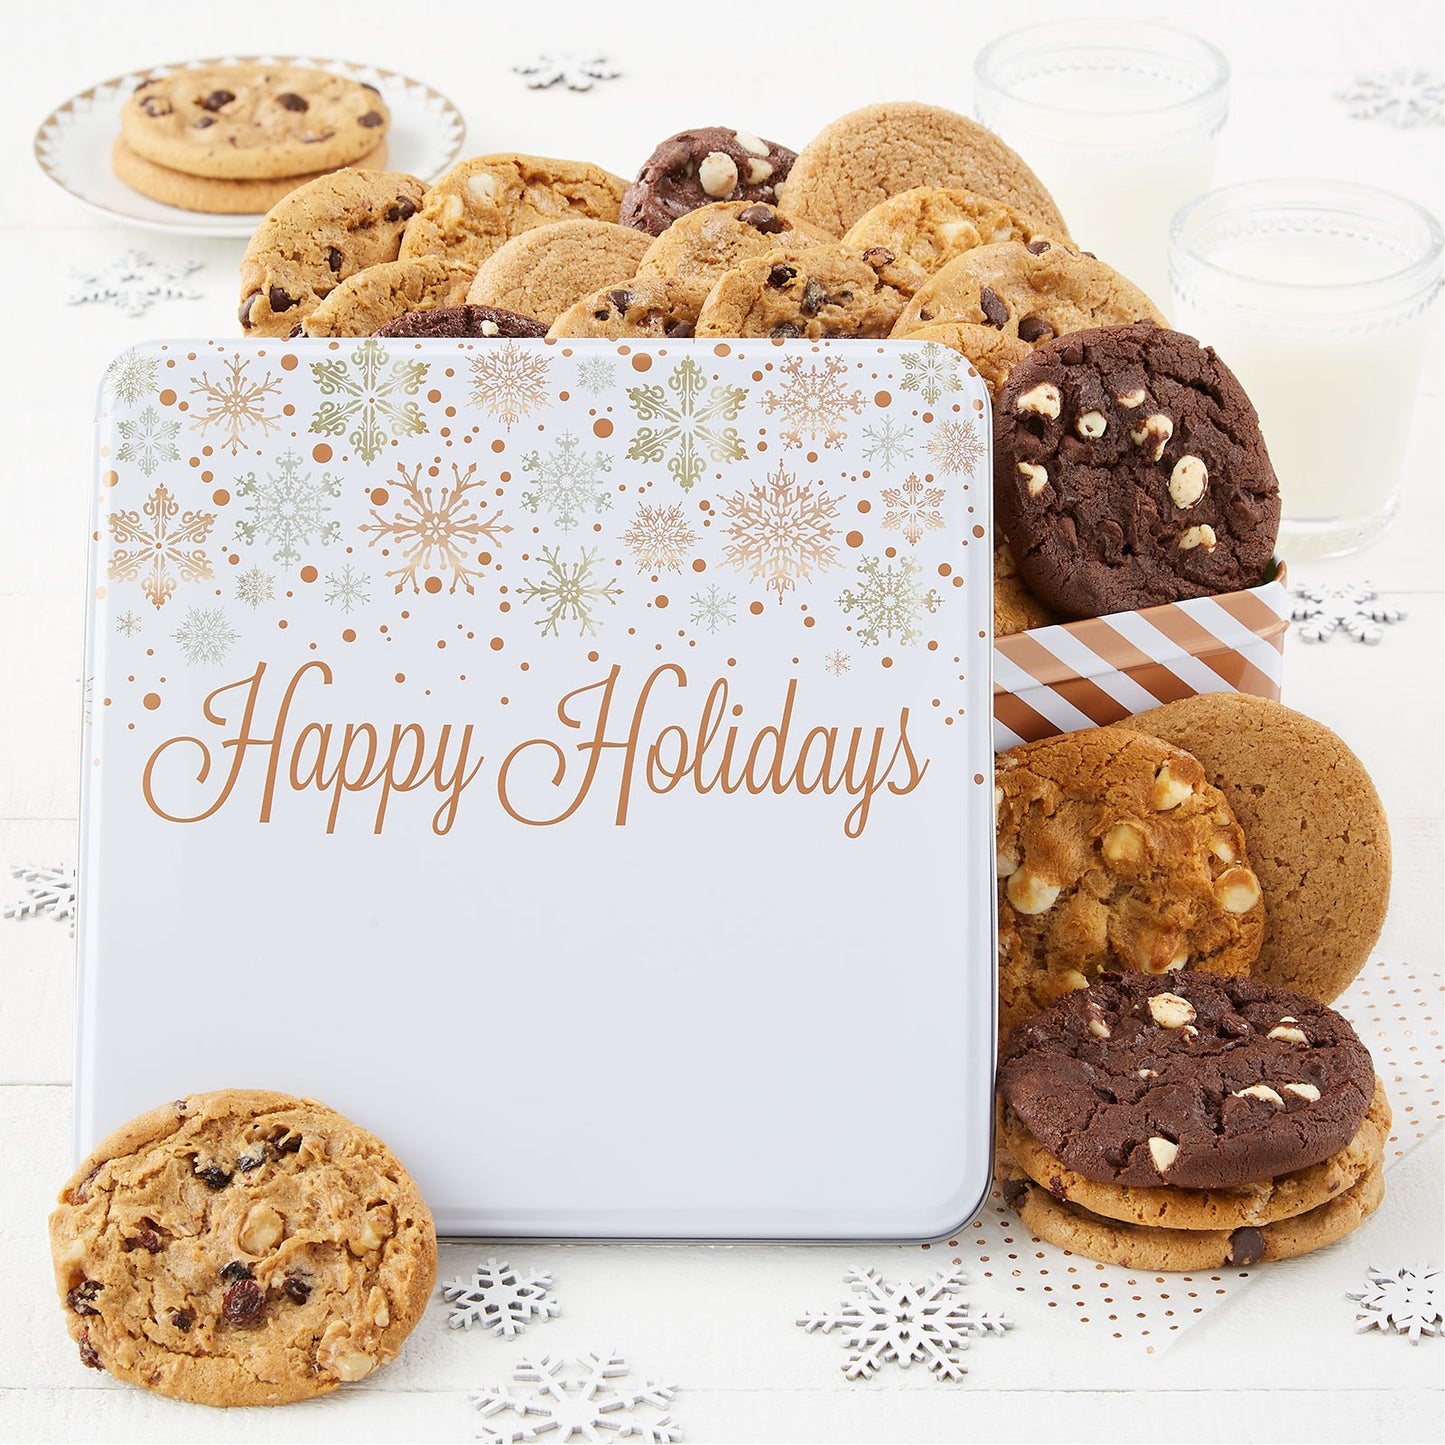 A Happy Holidays gift tin decorated with silver and gold snowflakes on a white top and filled with an assortment of original cookies